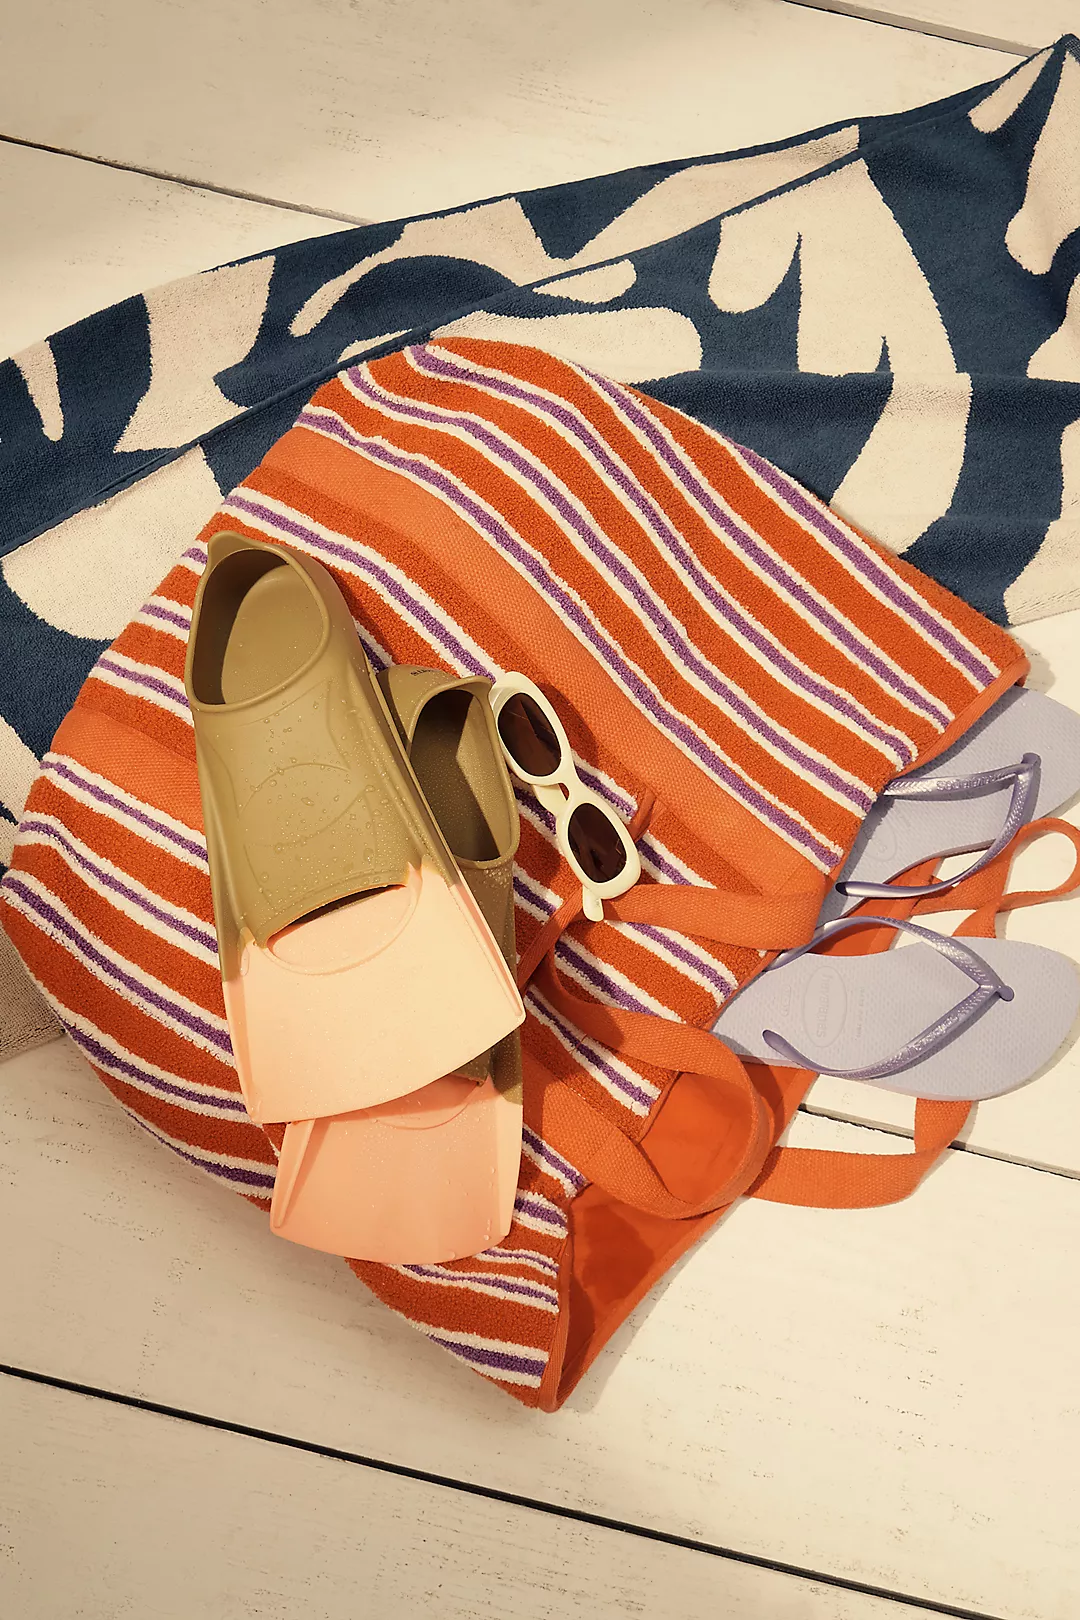 Anthropologie – Striped Terry Summer Tote